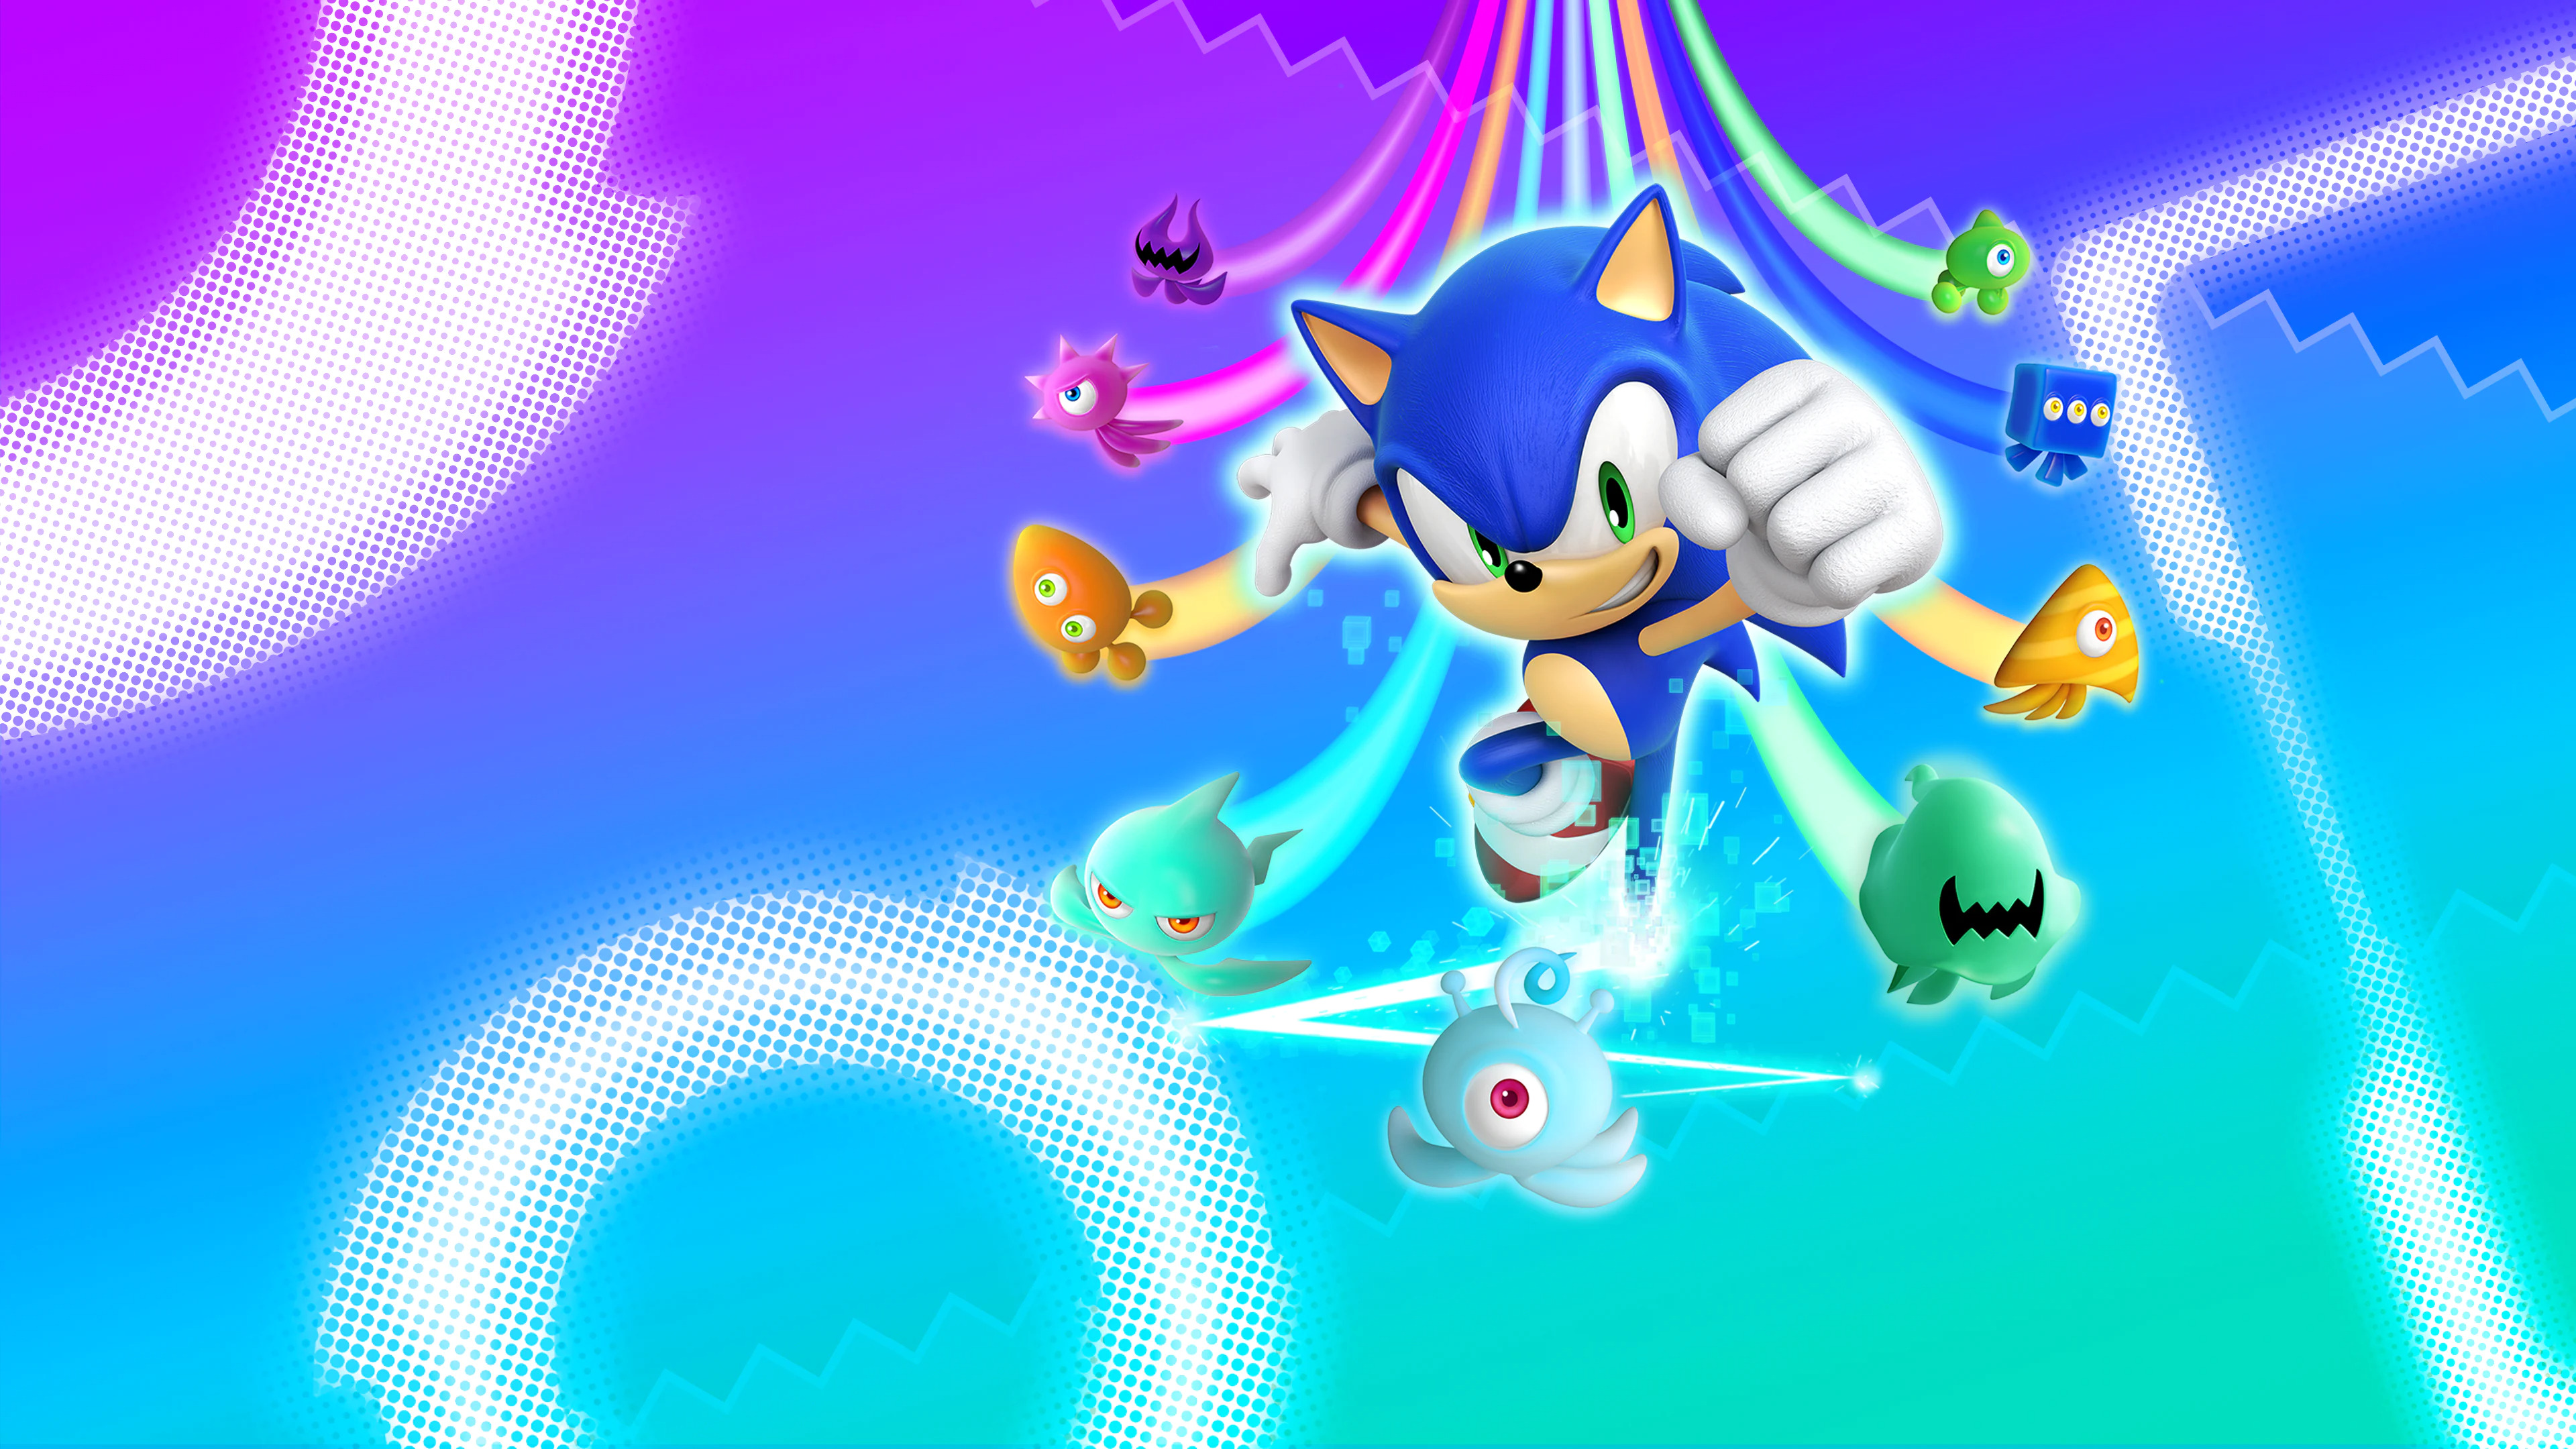 Sonic Colors: Rise of the Wisps Part 1 now available - Gematsu